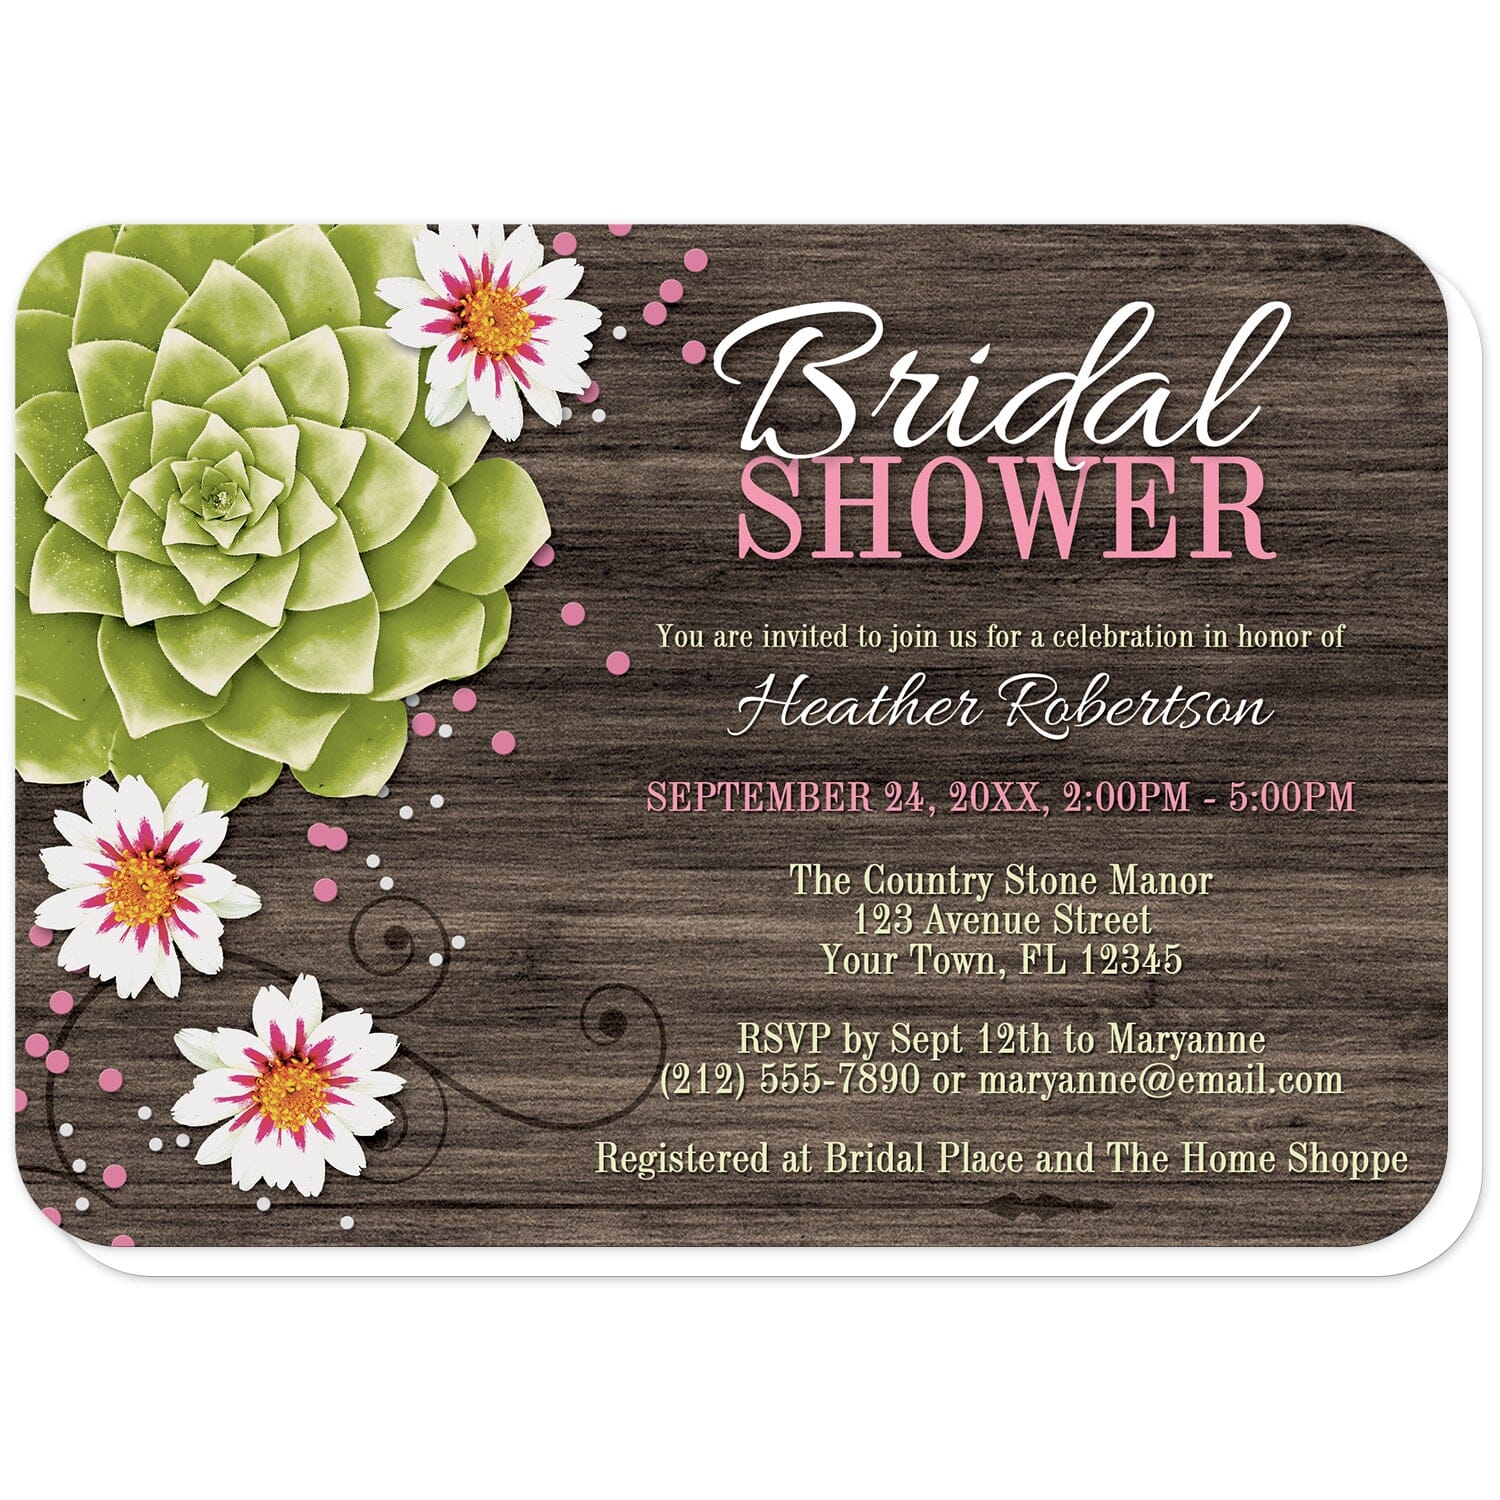 Rustic Succulent Floral Bridal Shower Invitations (with rounded corners) at Artistically Invited. Rustic succulent floral bridal shower invitations with a stylized illustration of a large green succulent, white flowers, and your choice of pink, purple, or teal and white confetti over a dark brown wood texture image. Your personalized bridal shower celebration details are custom printed in white, beige, and the same color as the confetti accent color you select. 